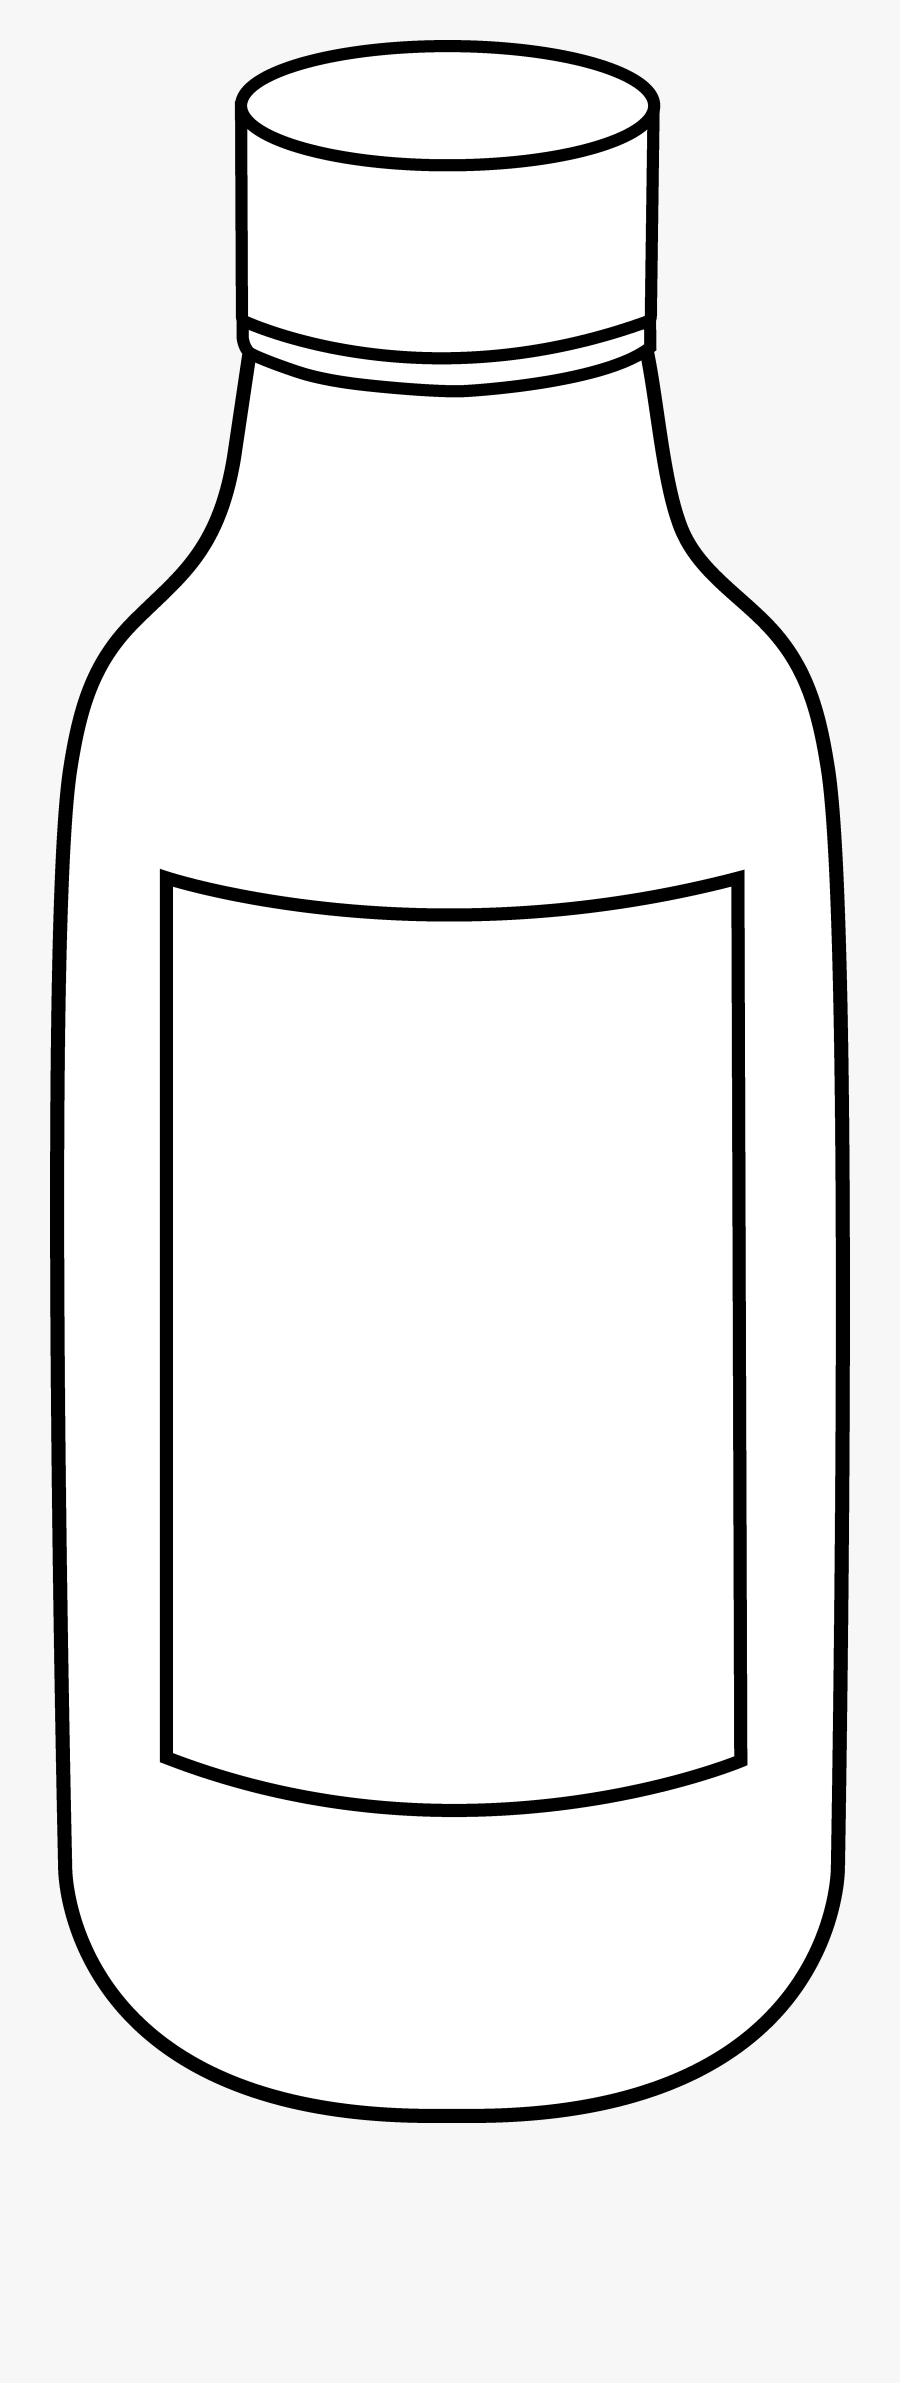 Water Bottle Clipart Black And White Panda All Type - Bottle Clipart Black And White, Transparent Clipart